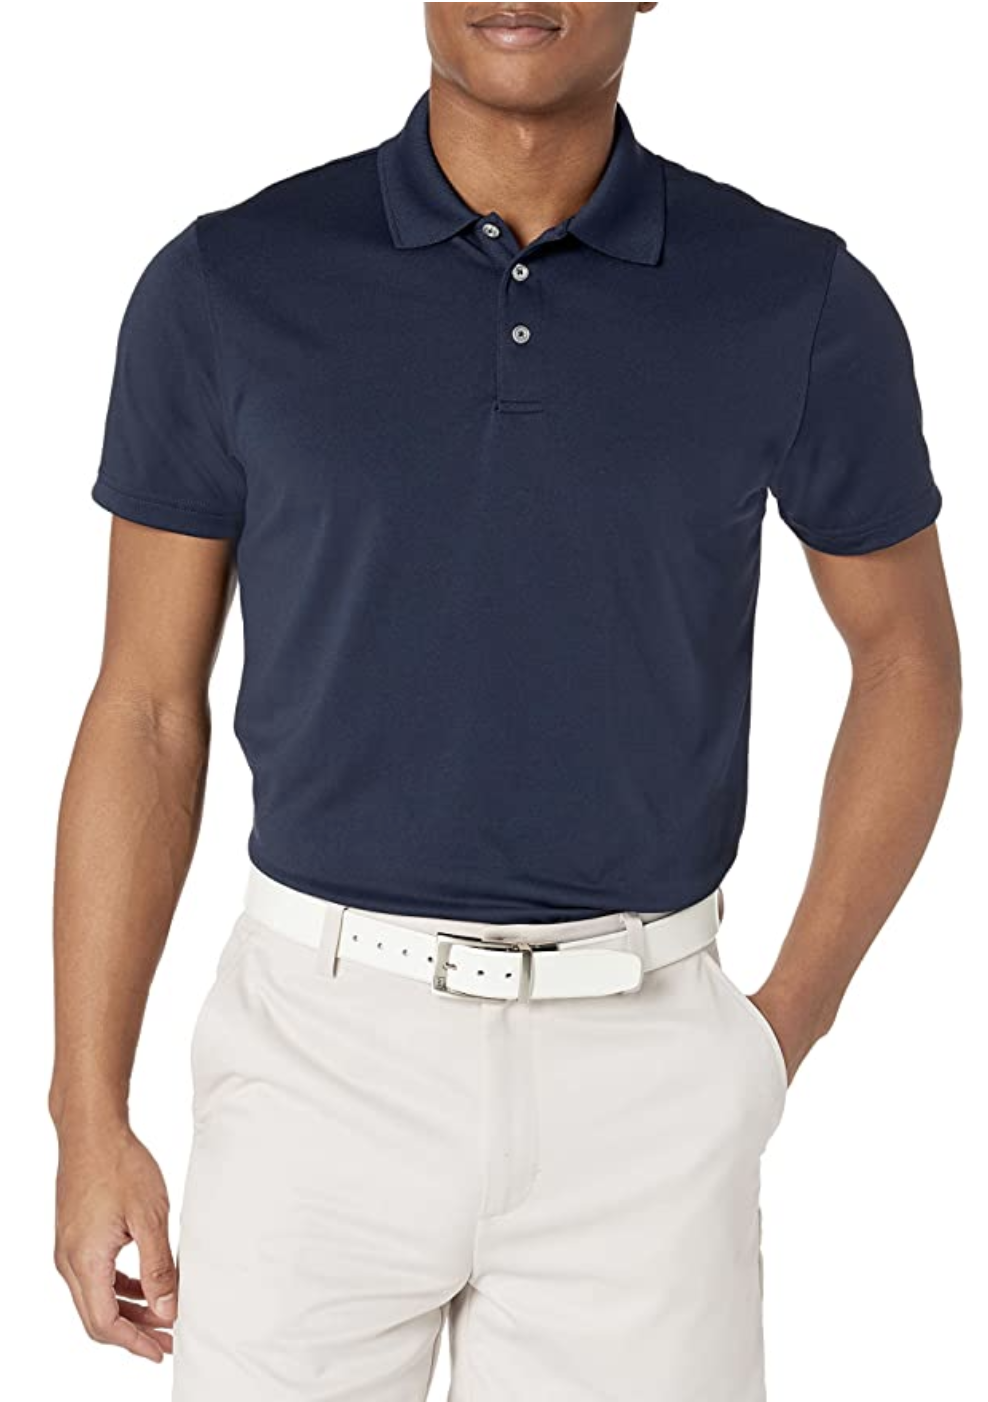 Men's Quick Dry Polo Shirt.png